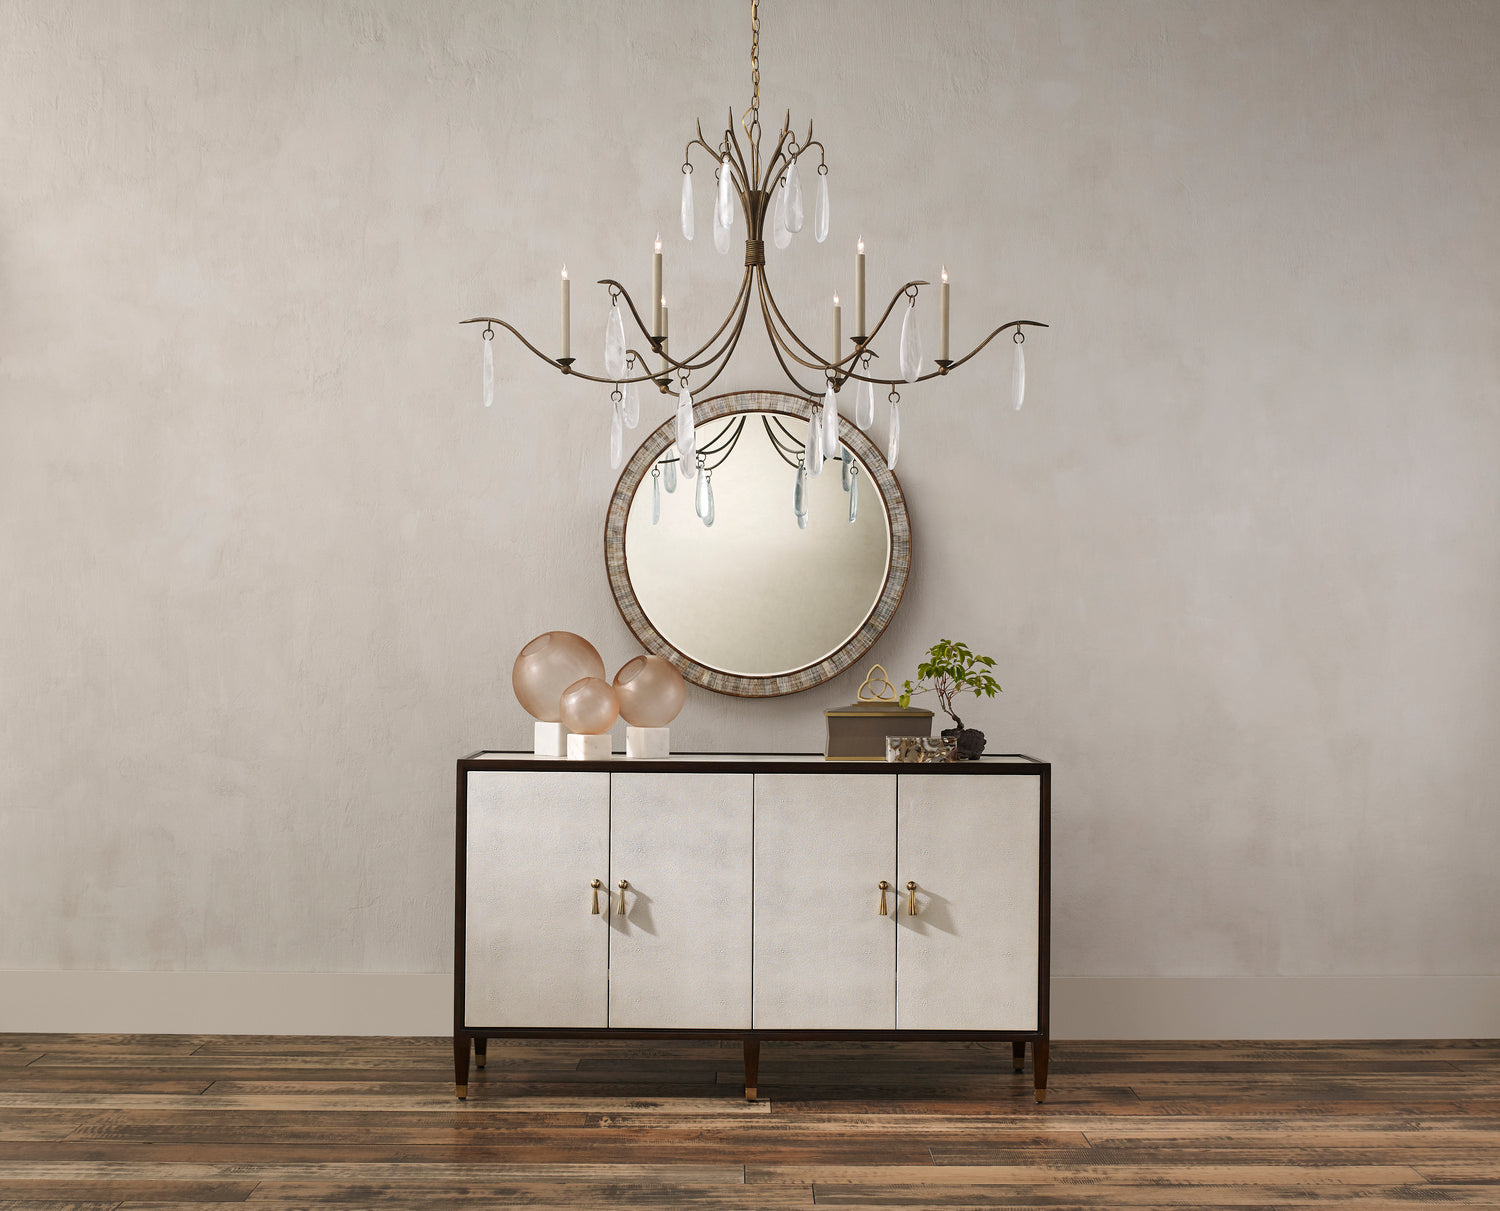 Six Light Chandelier from the Marshallia collection in Rustic Gold/Faux Rock Crystal finish